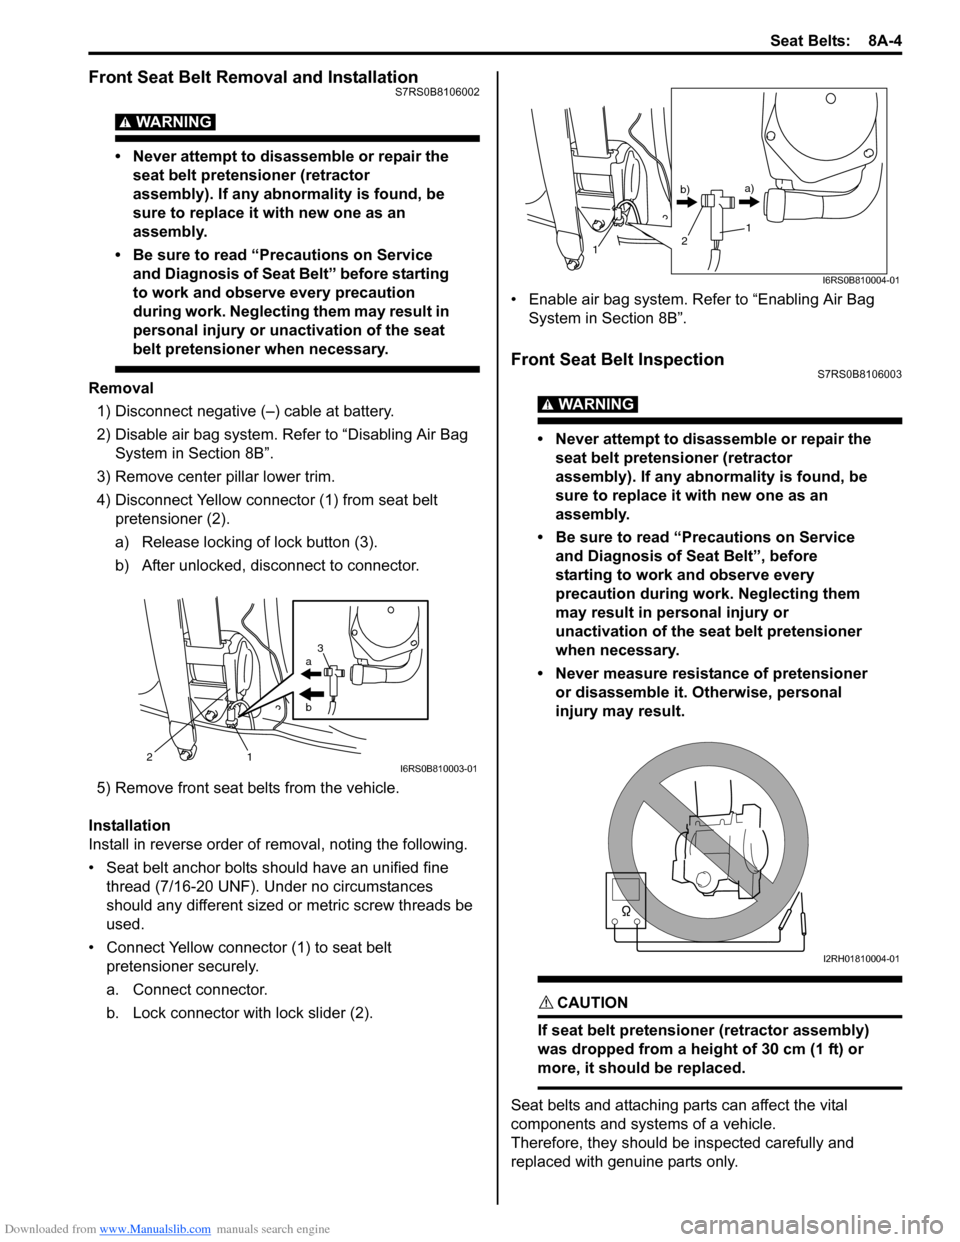 SUZUKI SWIFT 2008 2.G Service Workshop Manual Downloaded from www.Manualslib.com manuals search engine Seat Belts:  8A-4
Front Seat Belt Removal and InstallationS7RS0B8106002
WARNING! 
• Never attempt to disassemble or repair the seat belt pret